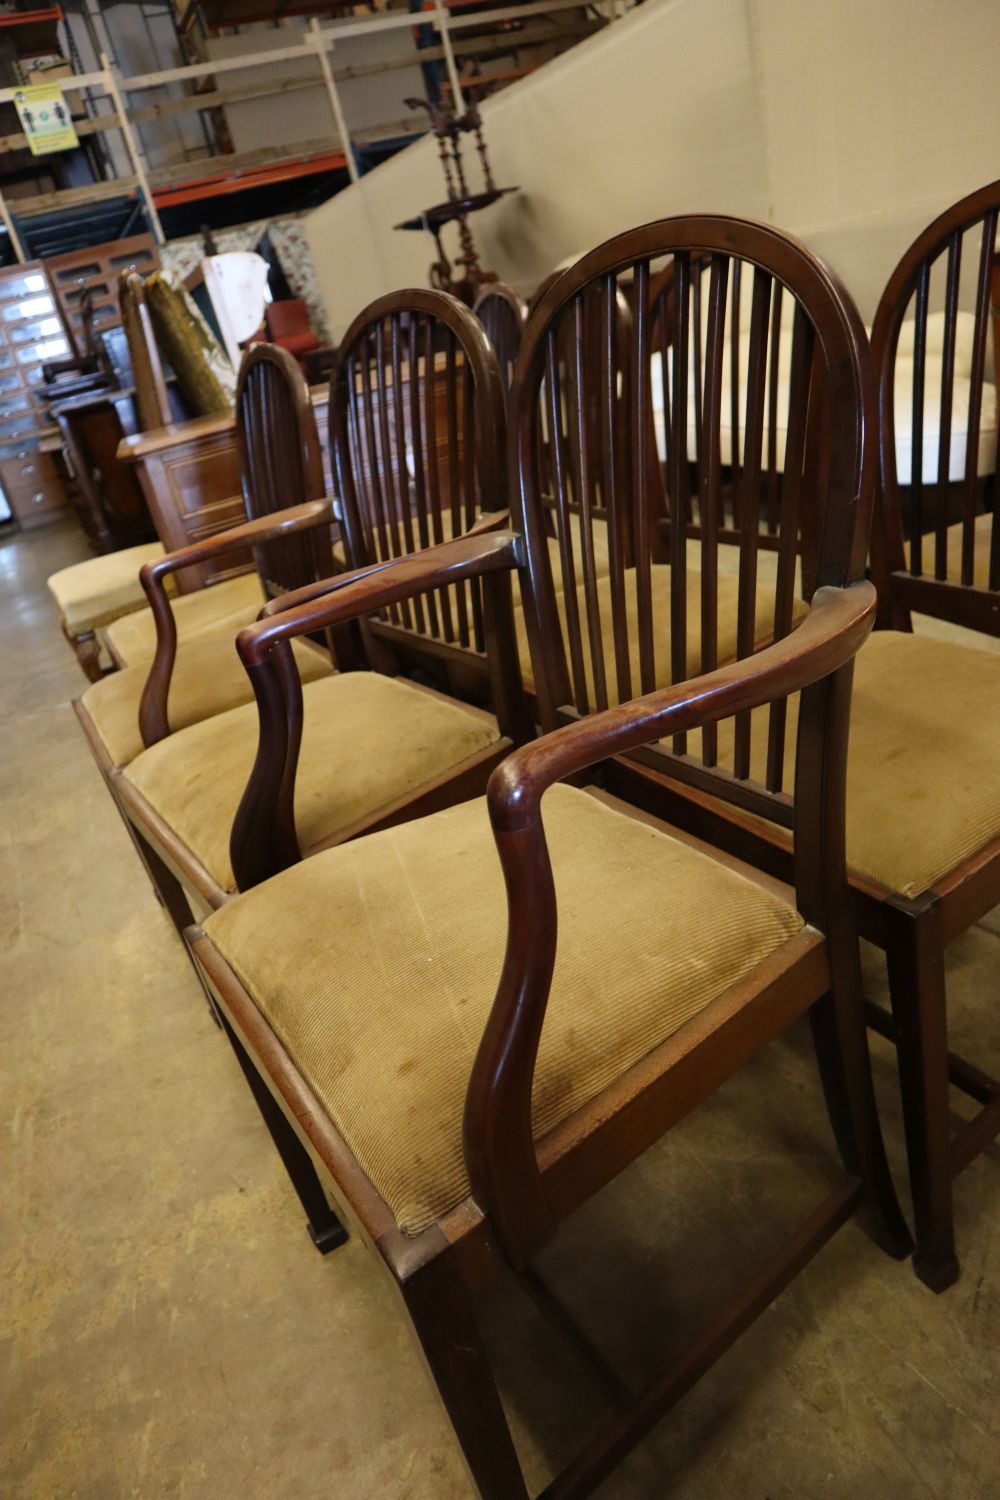 A set of nine Edwardian Hepplewhite white style mahogany dining chairs, including two carvers, with reeded backs and drop in seats, on